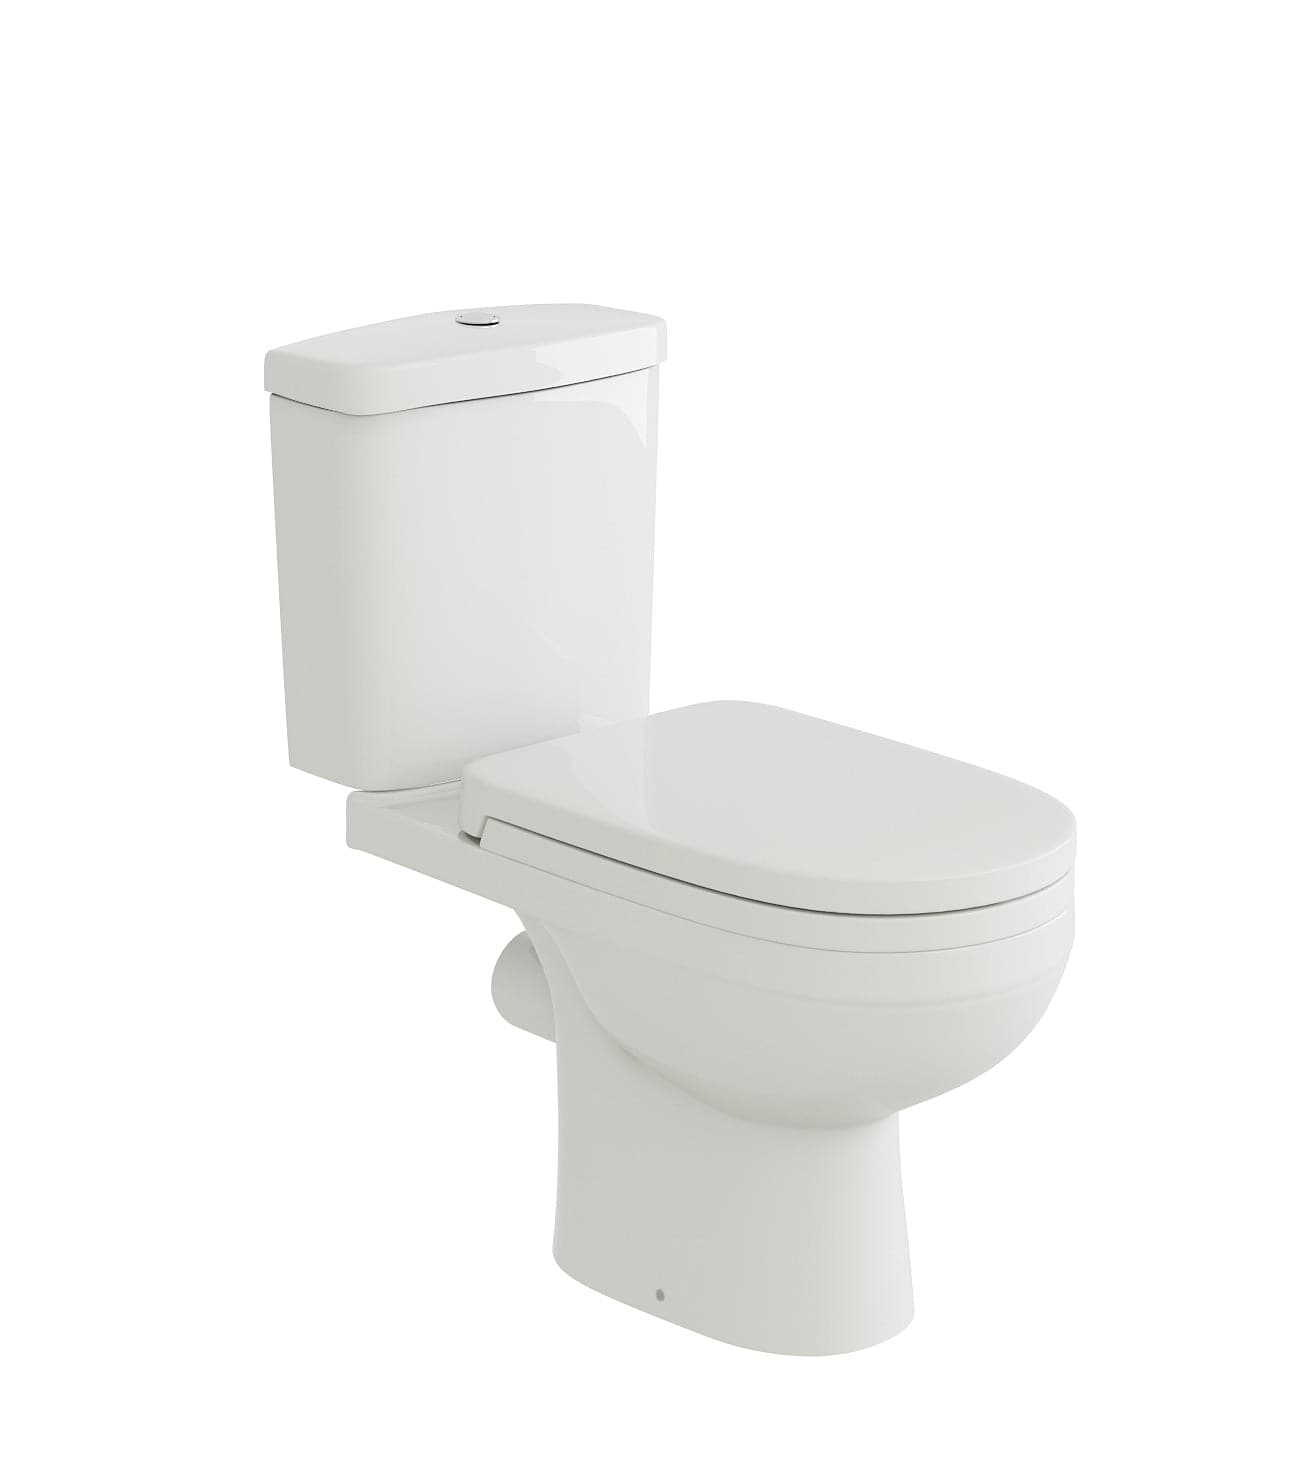 Modern white close coupled toilet with soft close seat and cistern. Sleek design WC (SLK630) for contemporary bathrooms. Ideal for small spaces. Shop now at Bathroom4Less.